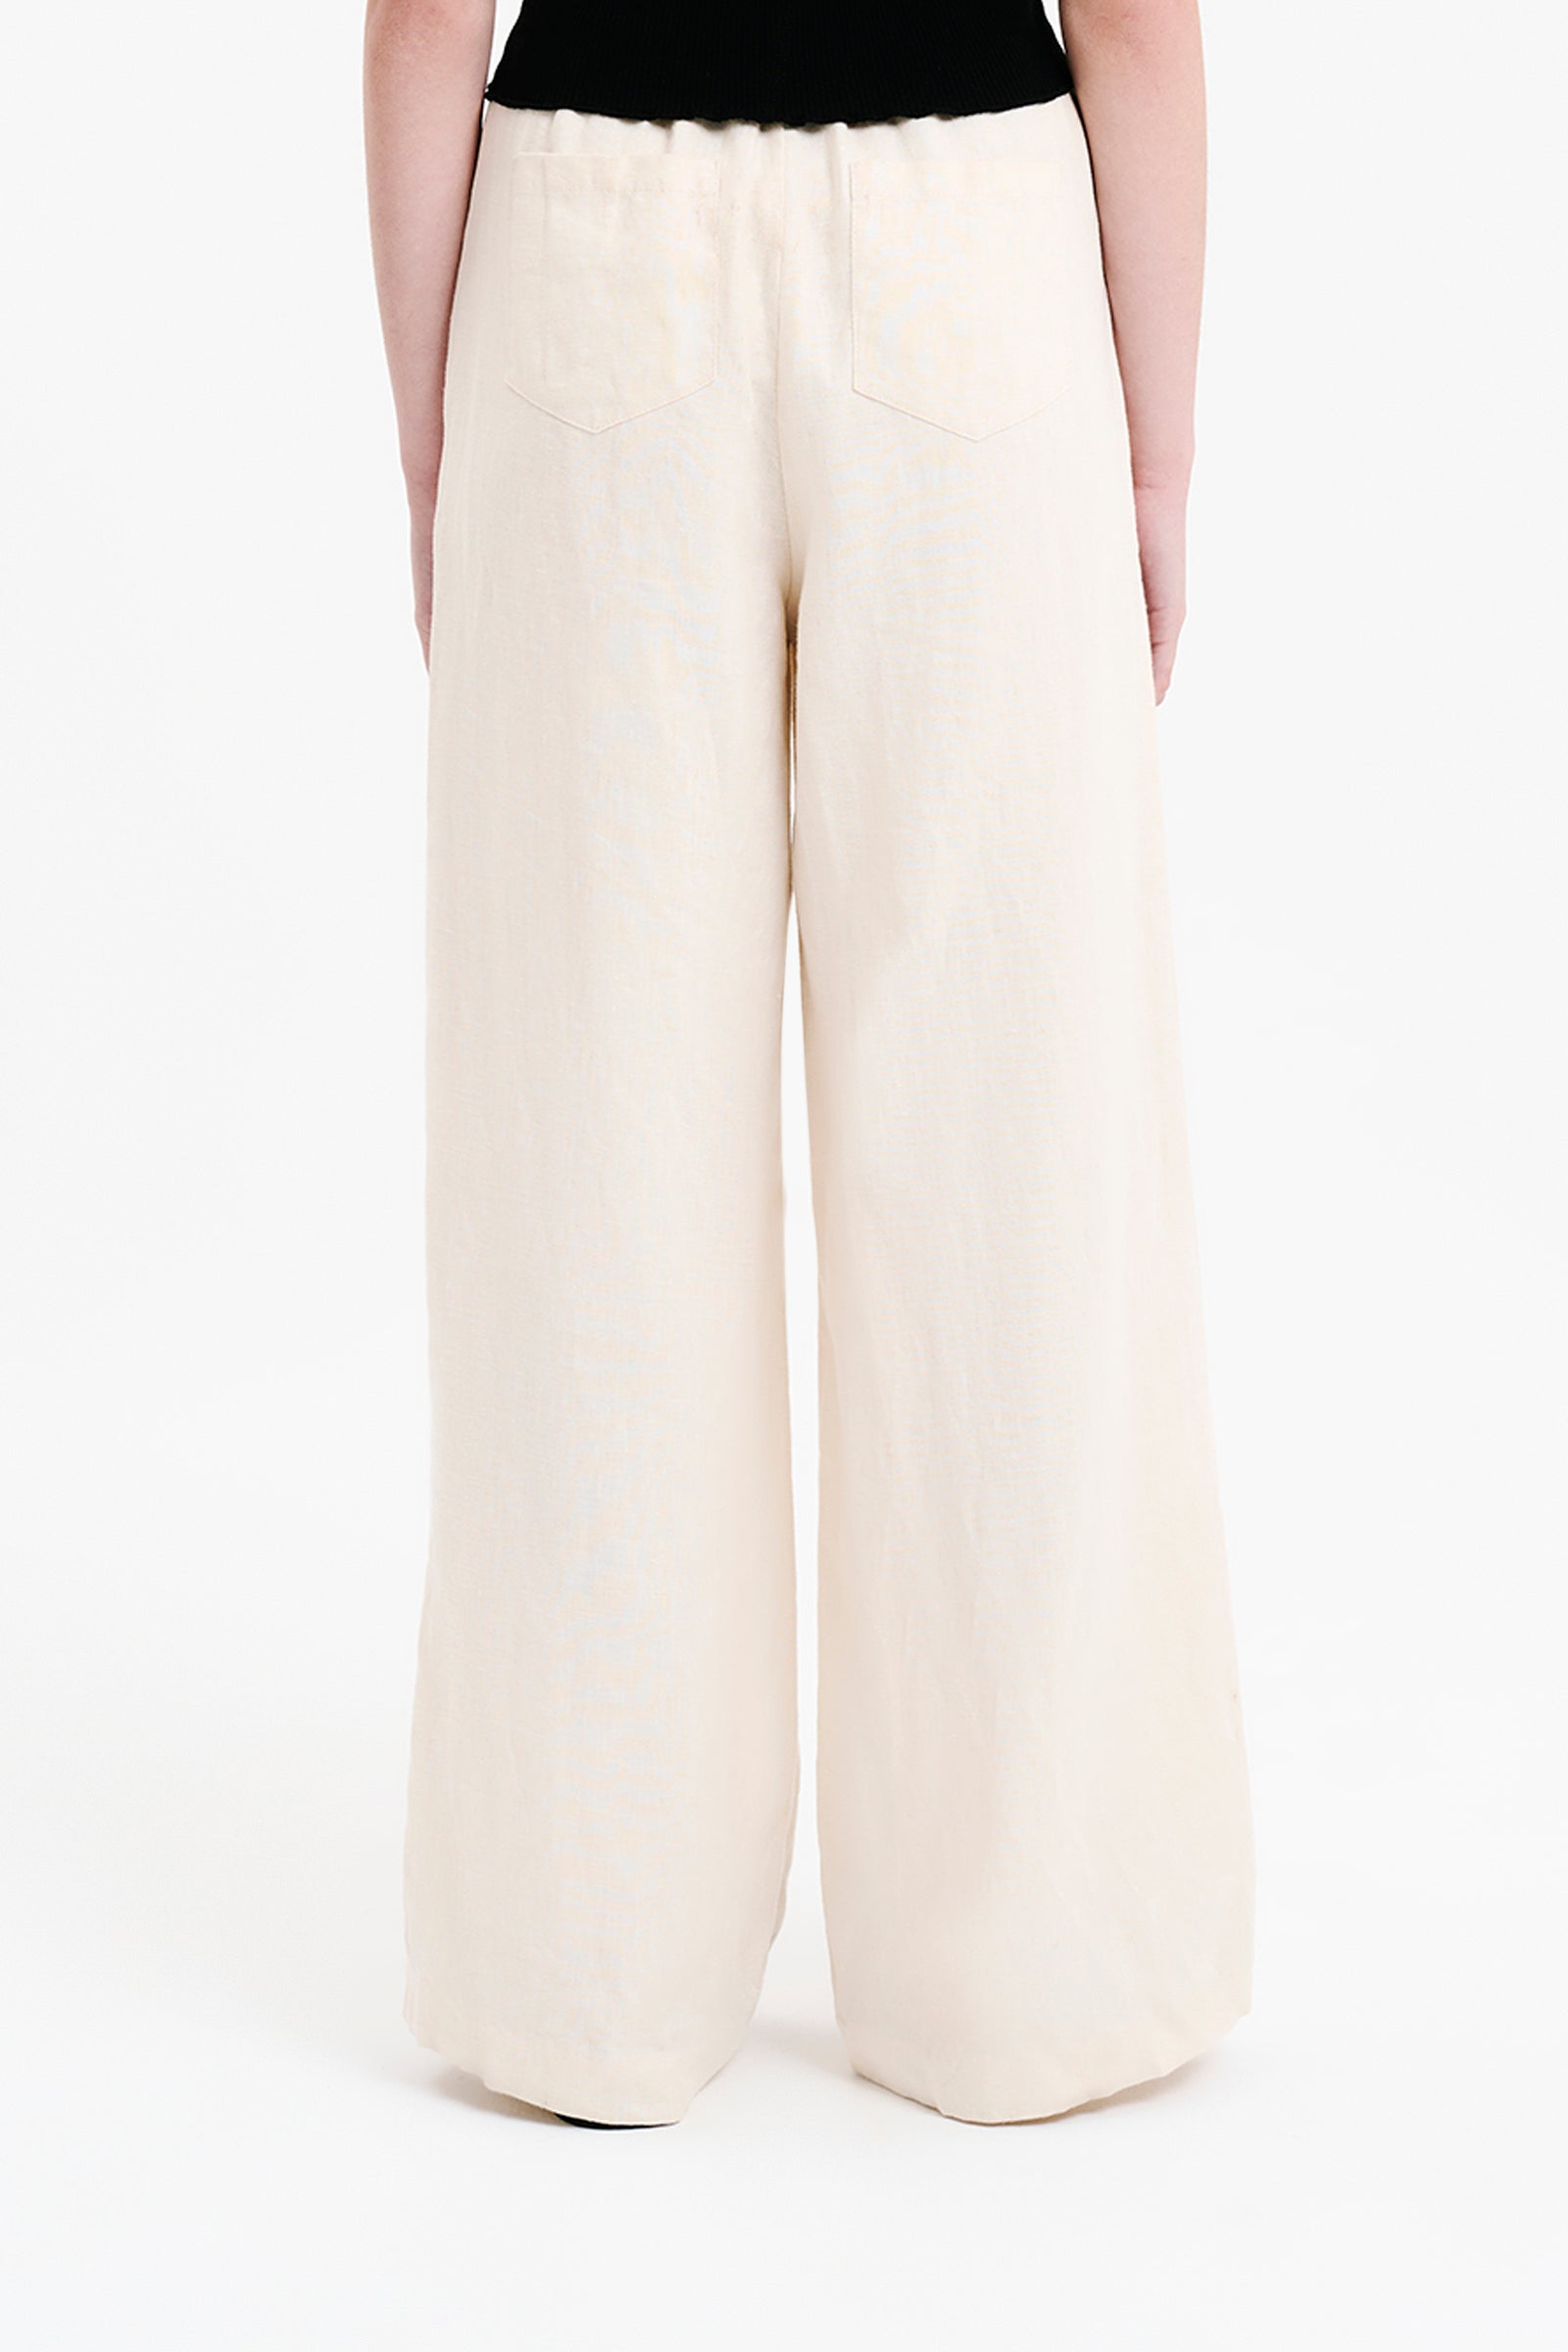 Nude Lucy Ceres Linen Pant in White Cloud